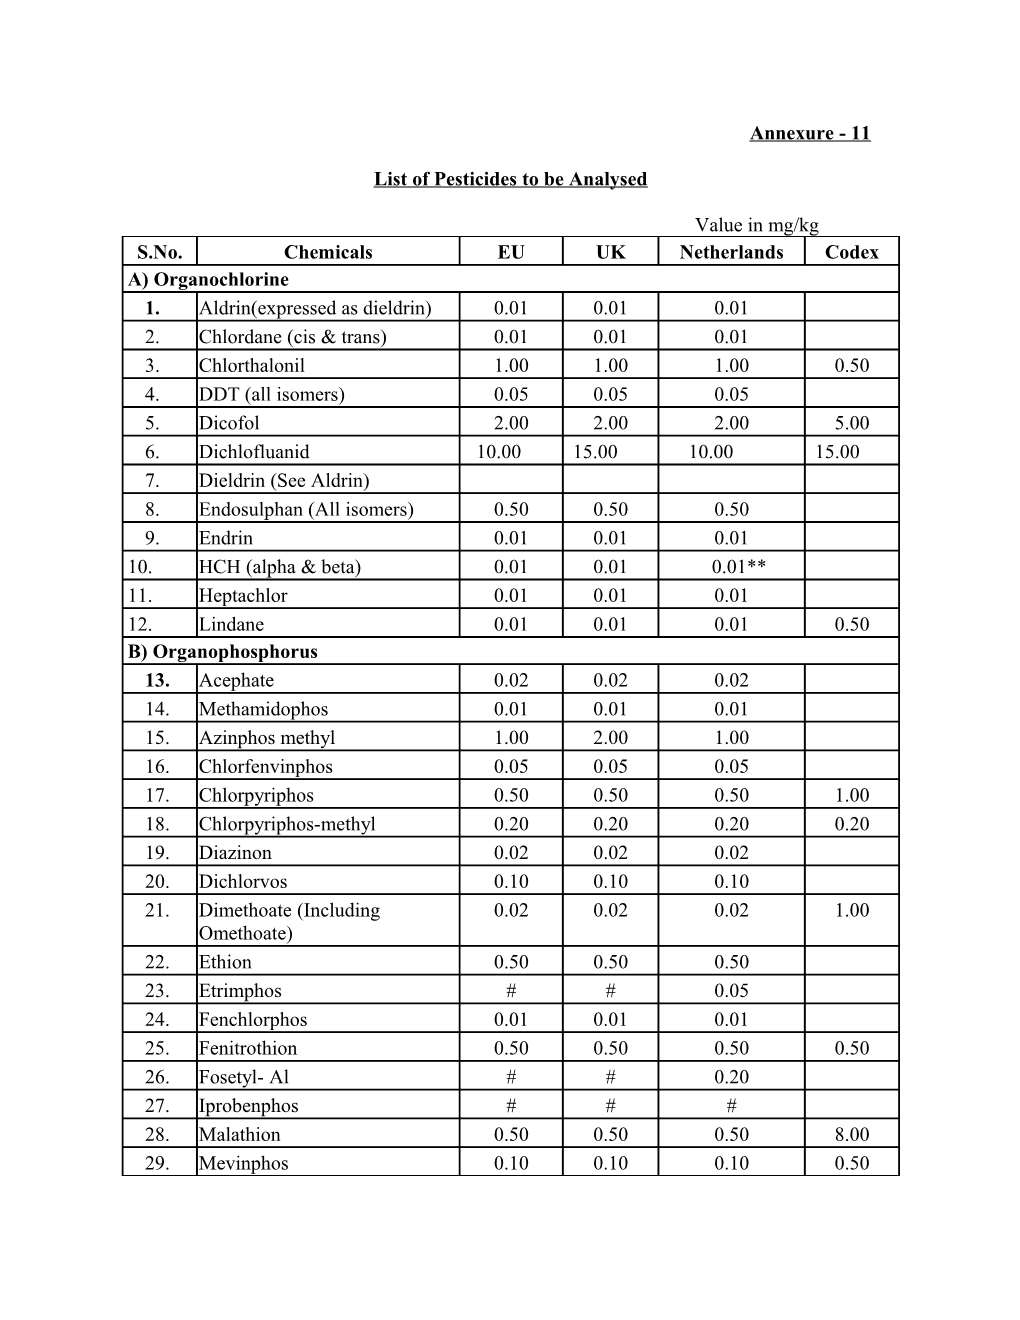 List of Pesticides to Be Analysed